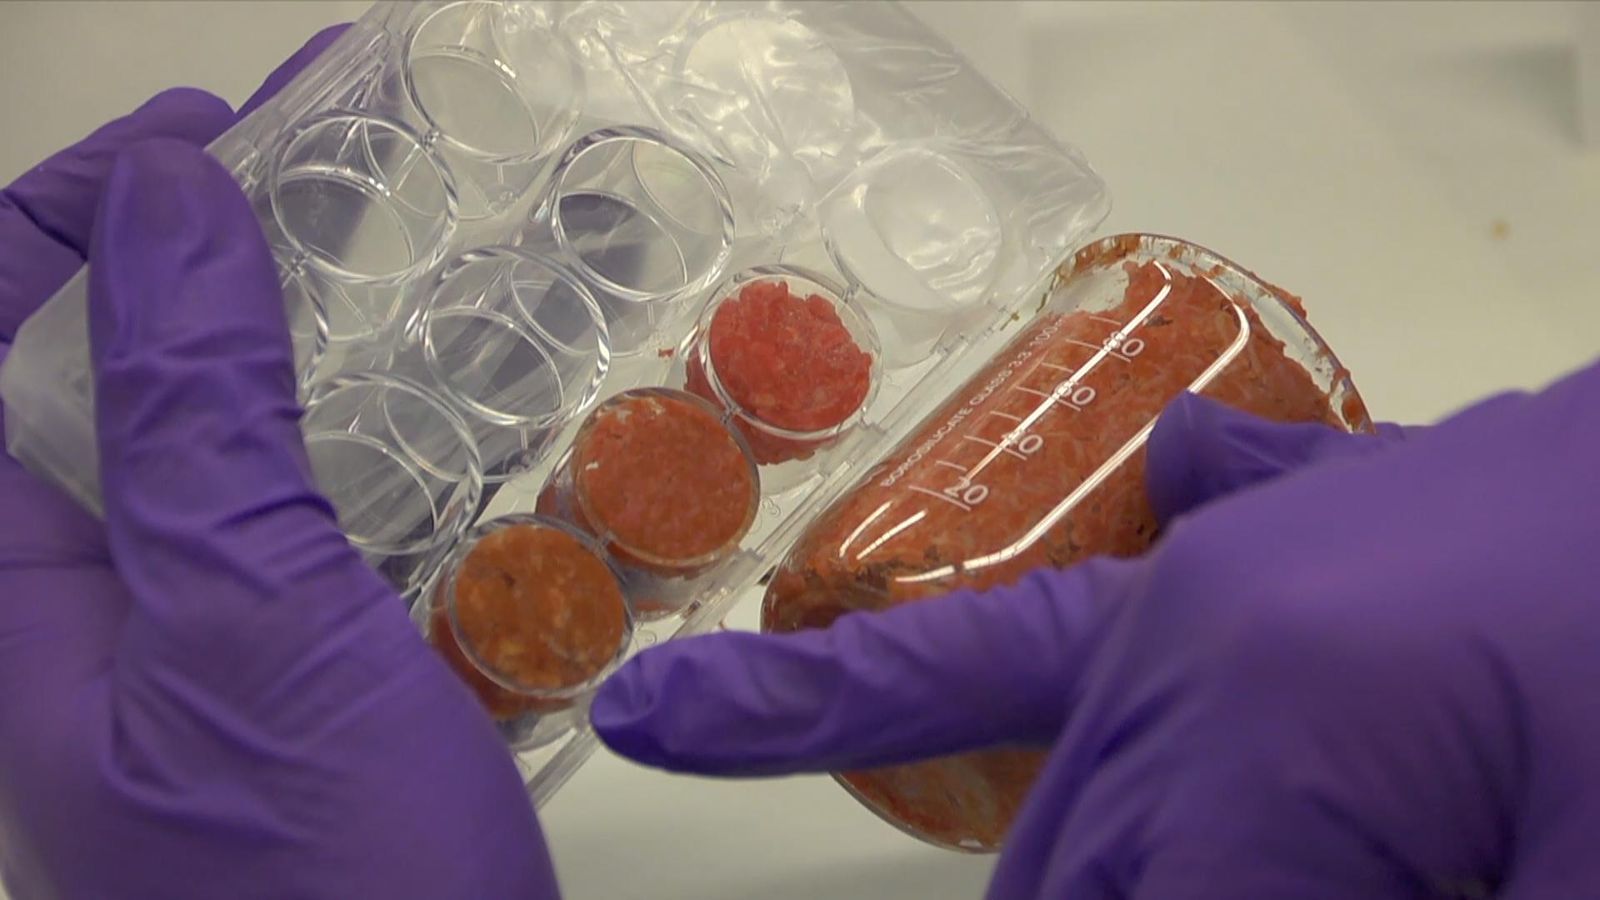 Lab Grown Meat Is The Future And Environmentally Friendly Says Think Tank Science And Tech News